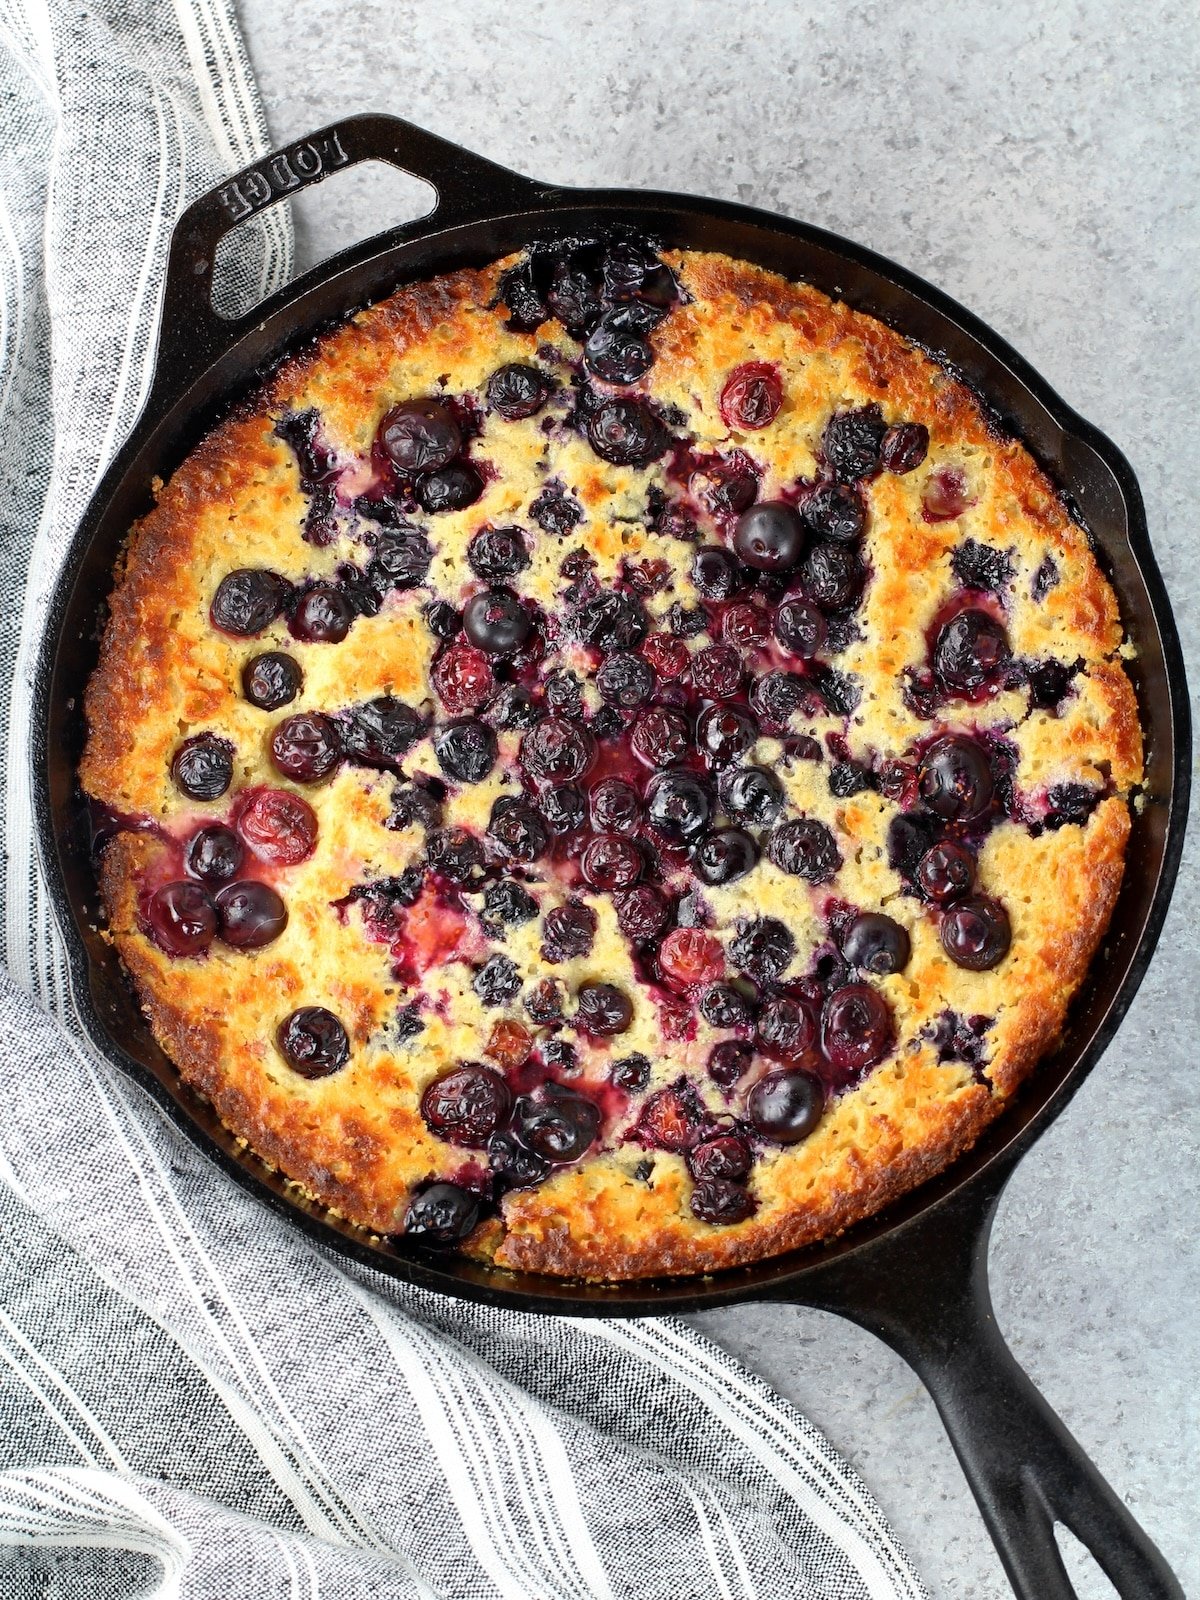 Blueberry Cobbler baked in a cast iron skillet.